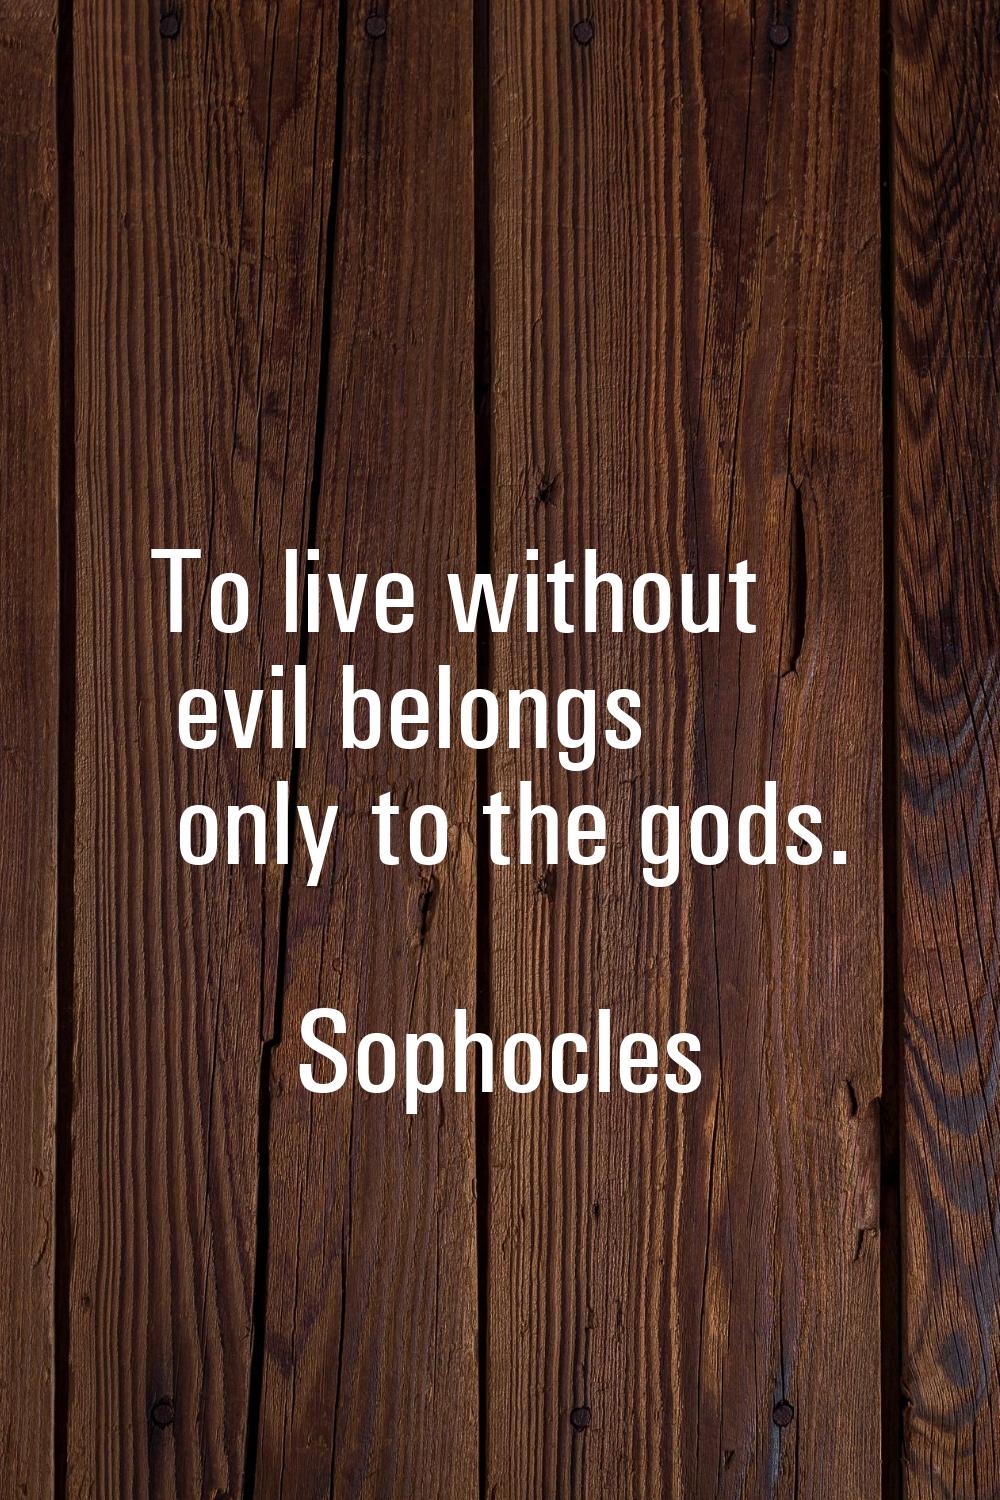 To live without evil belongs only to the gods.